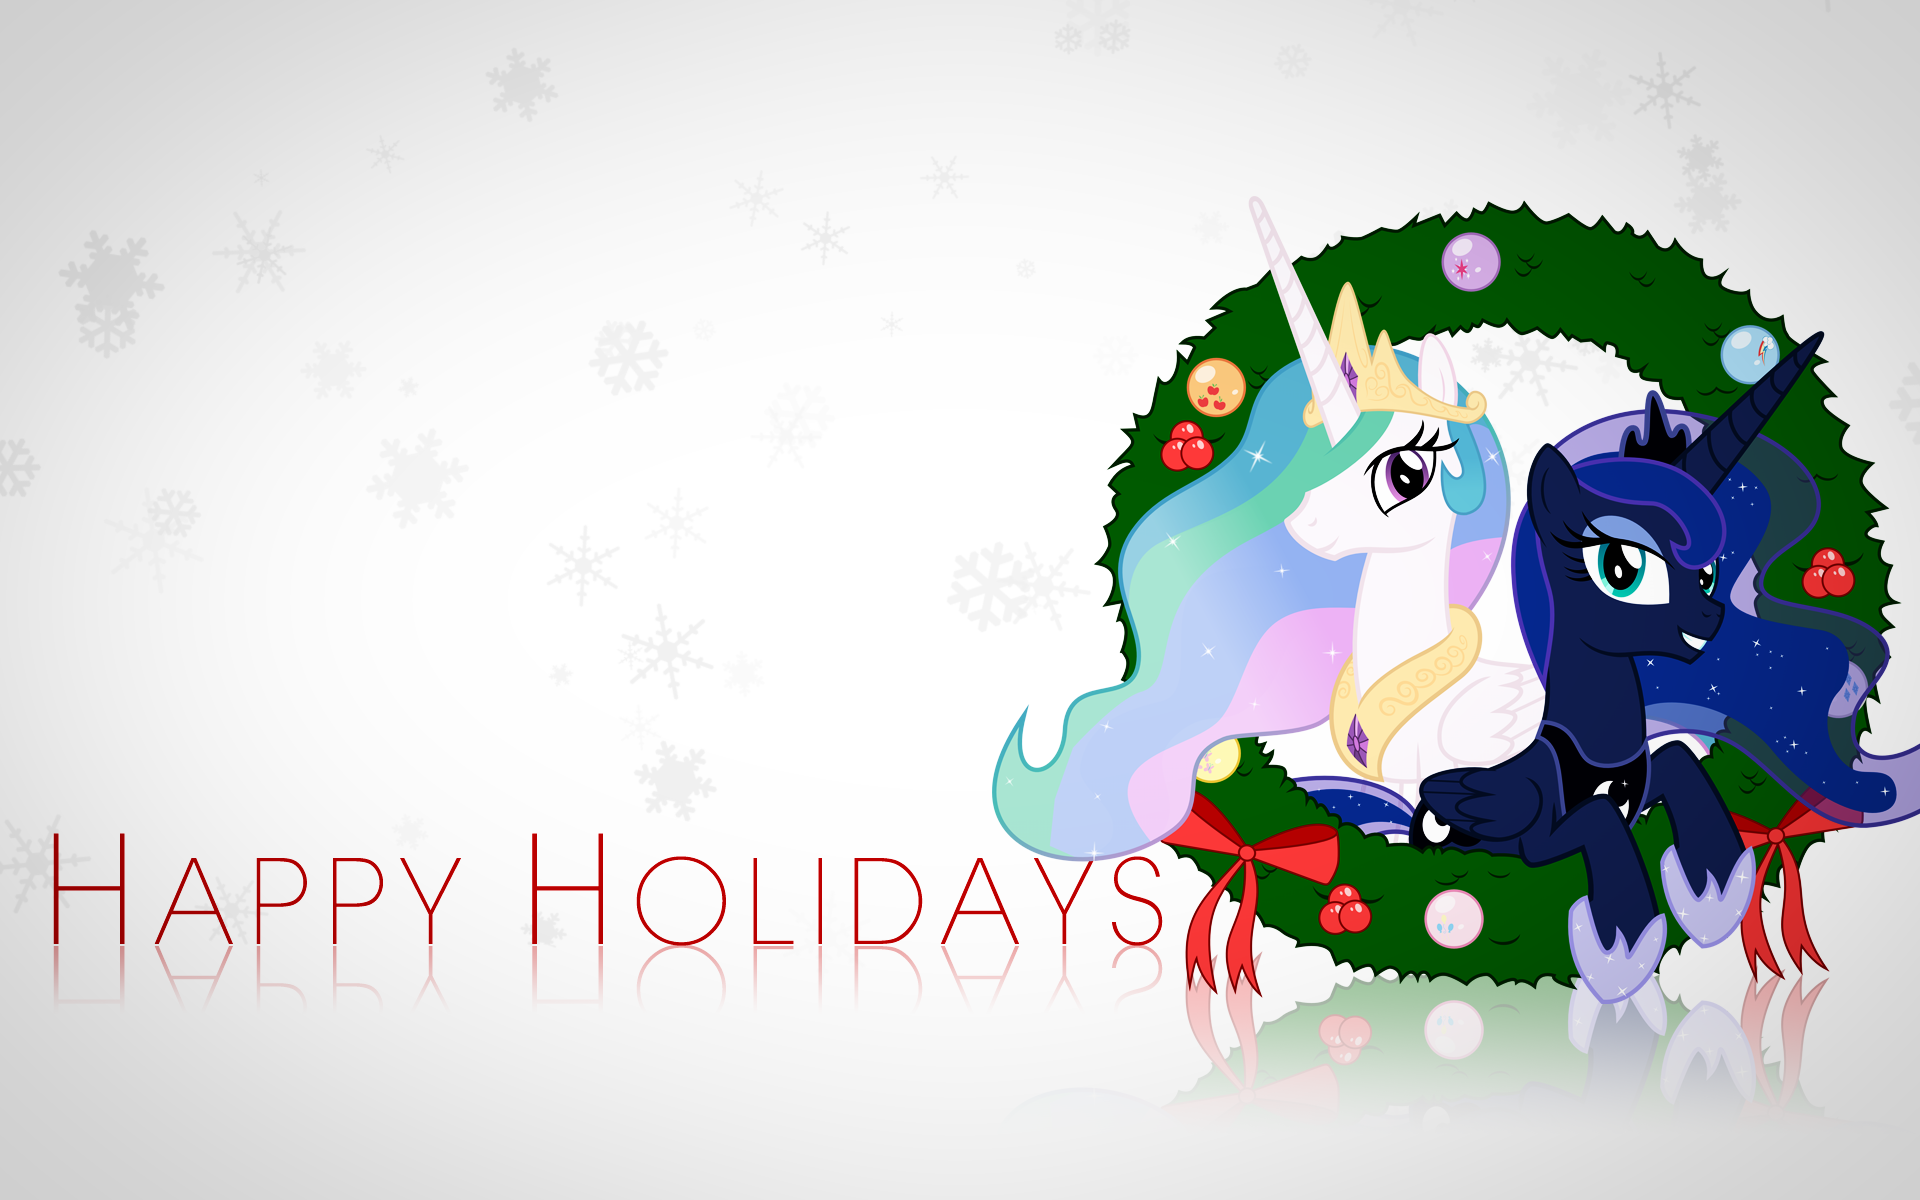 Happy Holidays by Takua770 and Vexx3